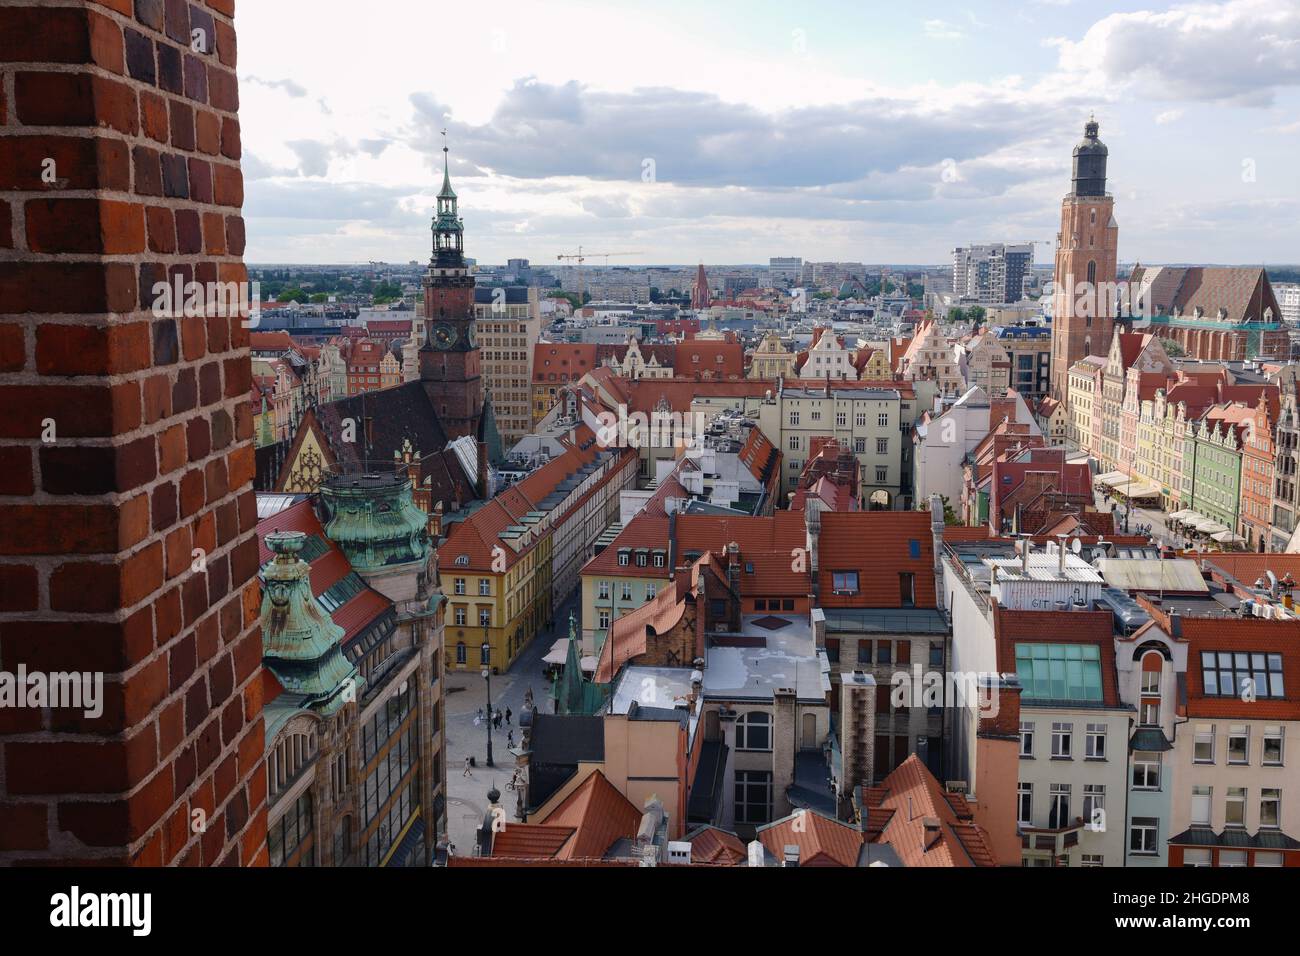 Market Square (Rynek), viewed from the Bridge of Penitents at the top of St. Mary Magdalene Church, Wrocław, Lower Silesia, Poland, August 2021 Stock Photo